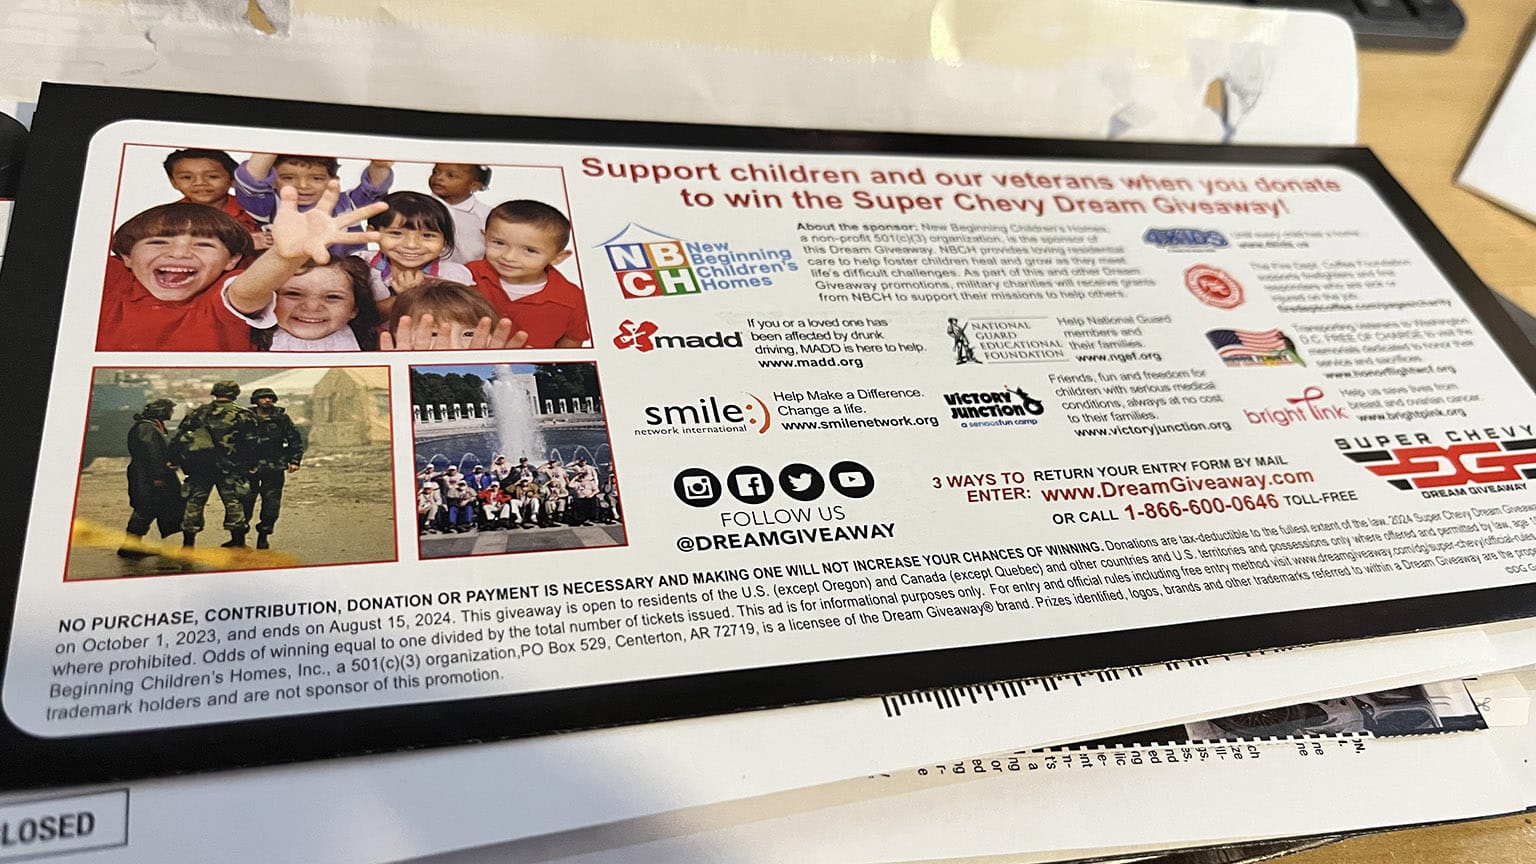 Image fo the Dream Giveaway mailer wiht the children and charisites listed such as New Beginning Children's Homes, Smile Network International, and Mothers Against Drunk Driving